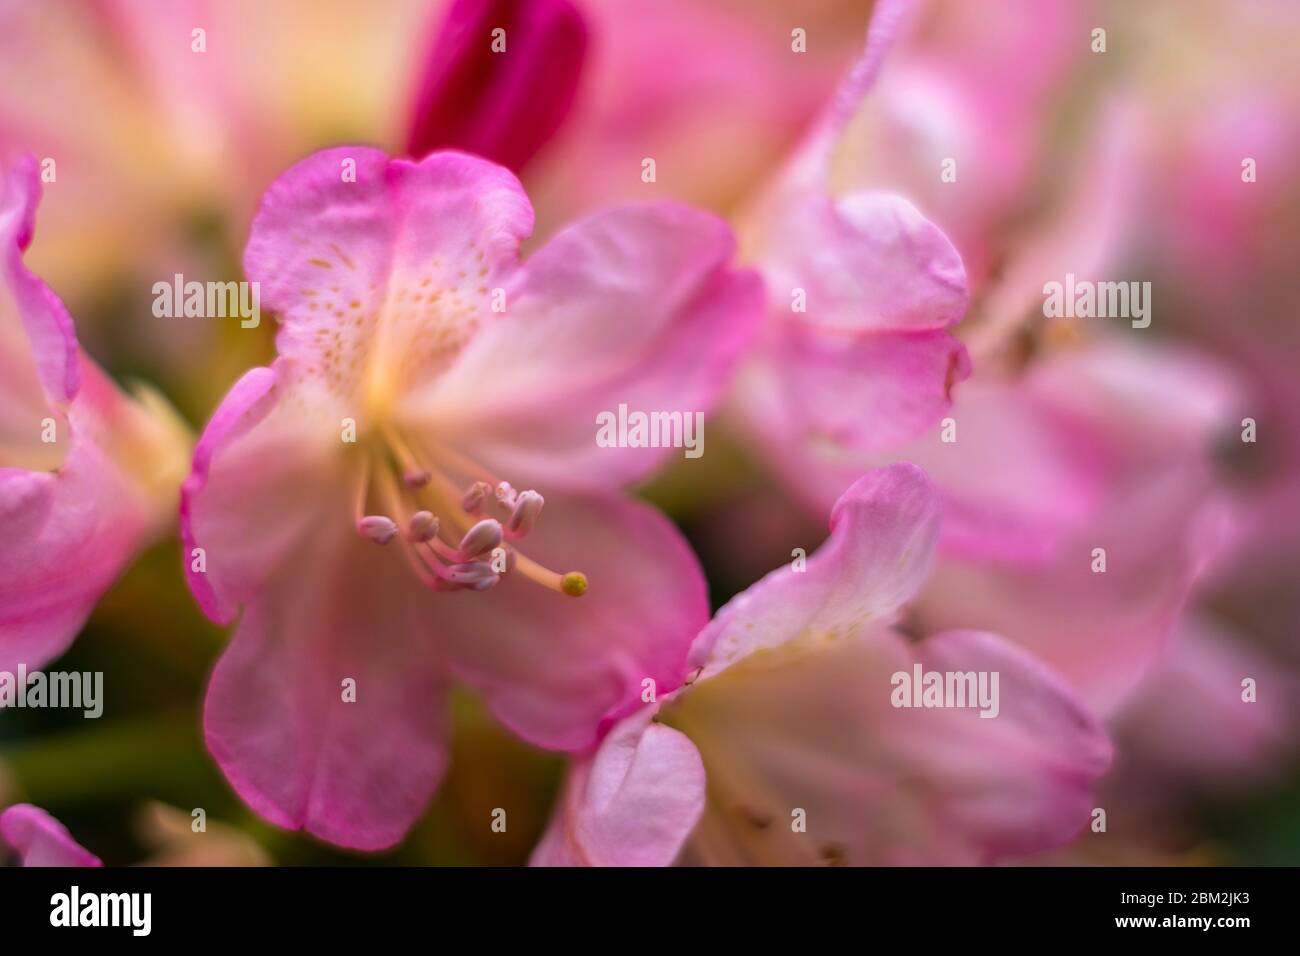 Pink rhodondendron flowers. Soft focus Stock Photo